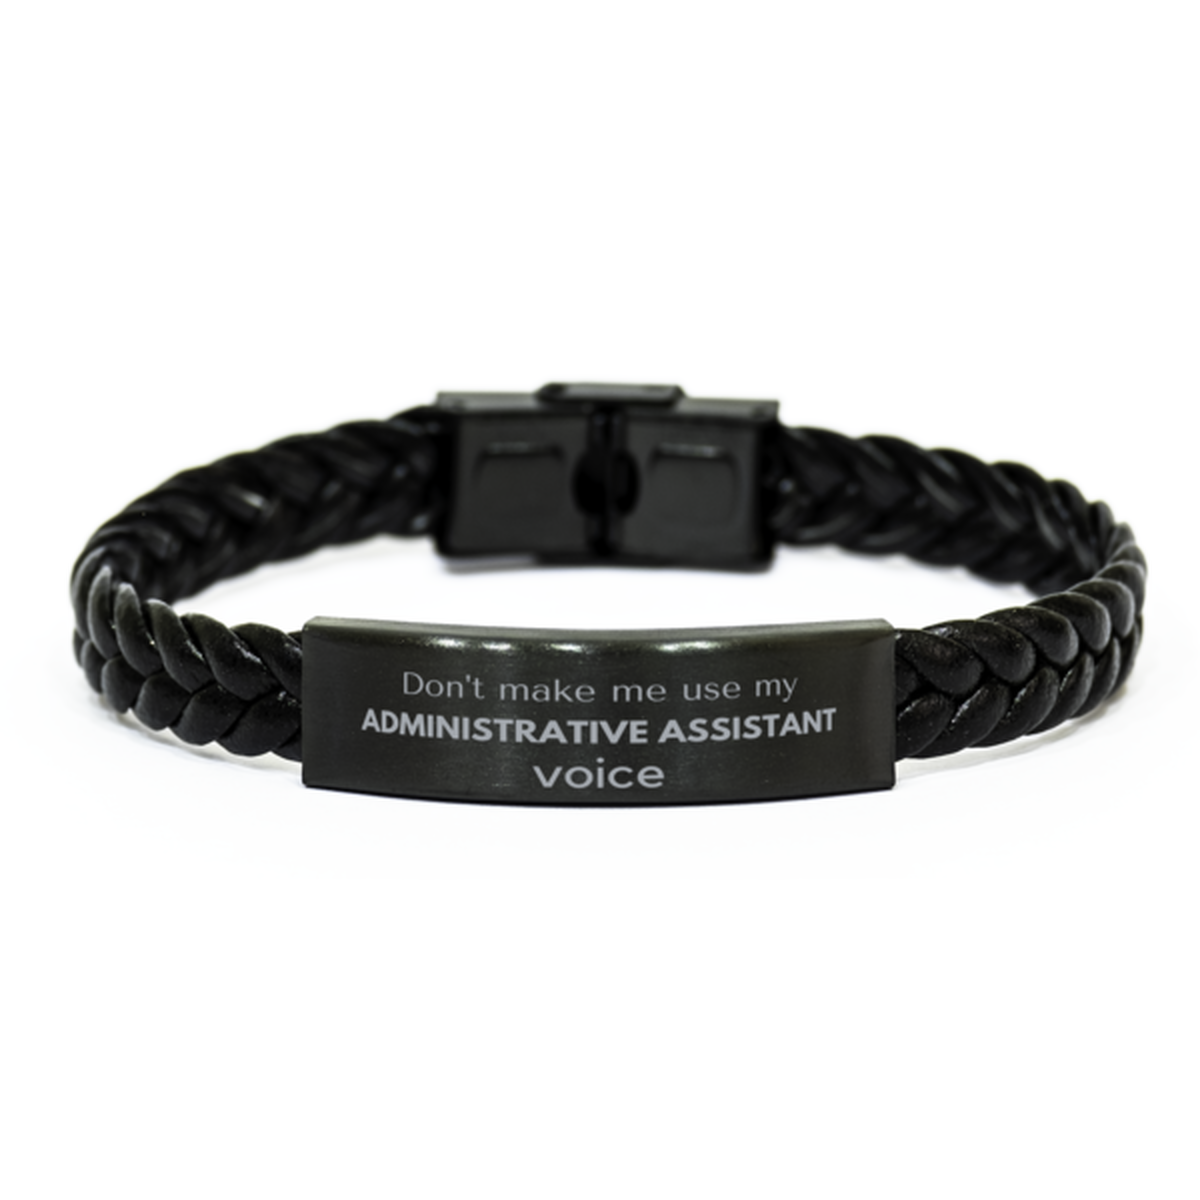 Don't make me use my Administrative Assistant voice, Sarcasm Administrative Assistant Gifts, Christmas Administrative Assistant Braided Leather Bracelet Birthday Unique Gifts For Administrative Assistant Coworkers, Men, Women, Colleague, Friends